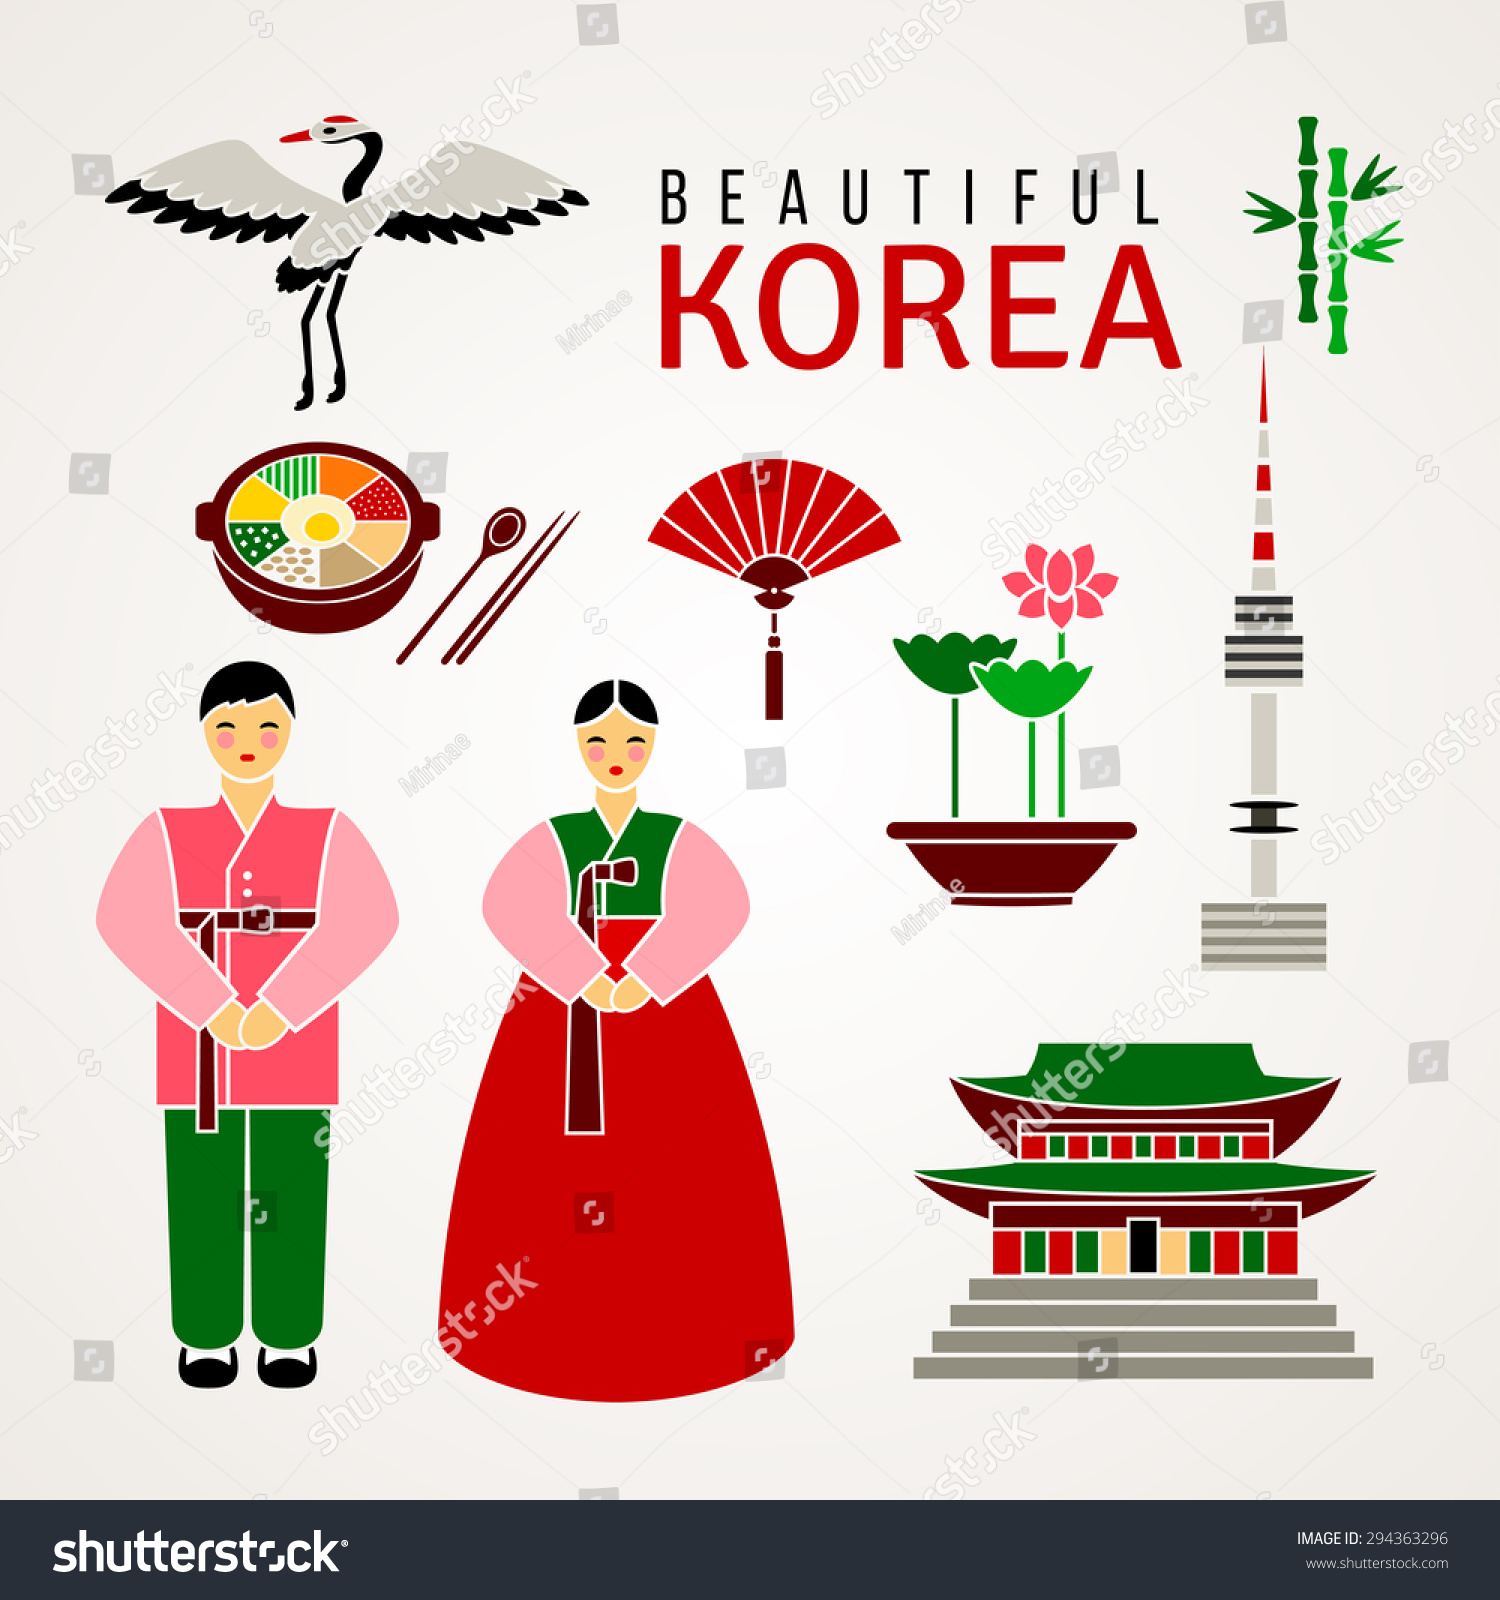 stock-vector-set-of-korean-cultural-symbols-man-and-woman-in-traditional-clothes-palace-lotus-flower-paper-294363296.jpg